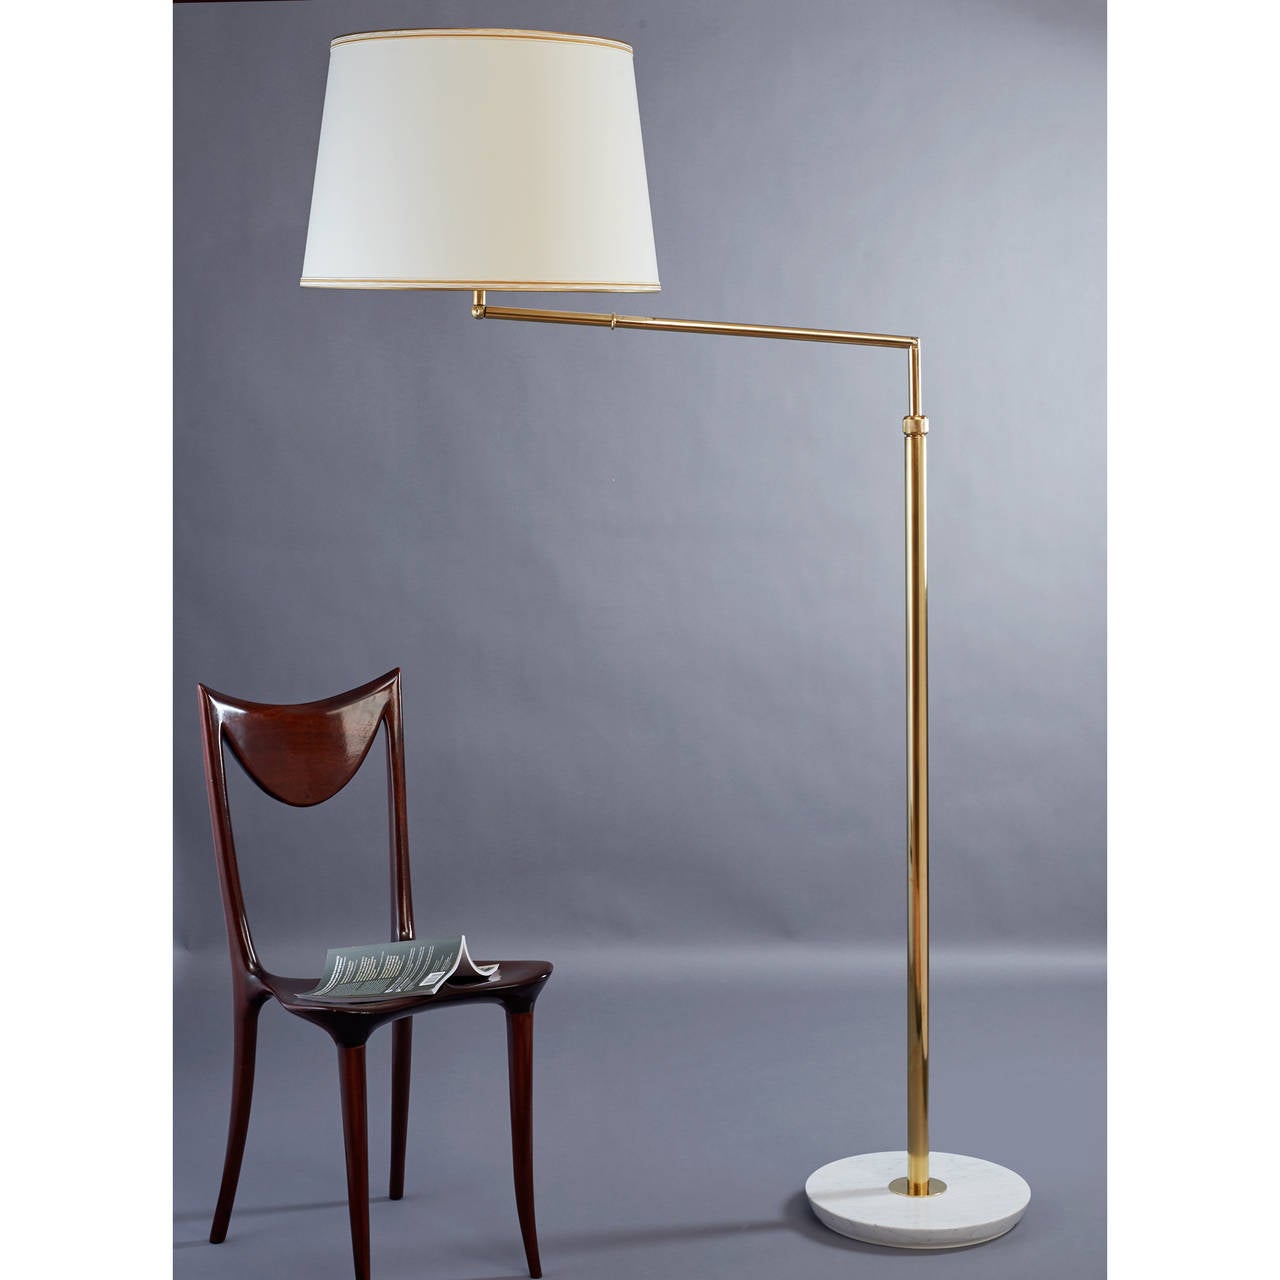 Oluce, Italy, 1940s floor lamp
A polished brass articulated and extending floor lamp on reverse beveled marble base, converts from a standing lamp to a reading lamp and back again, Italy, 1940s.
Dimensions: 75 H x 21 diameter; when in reading